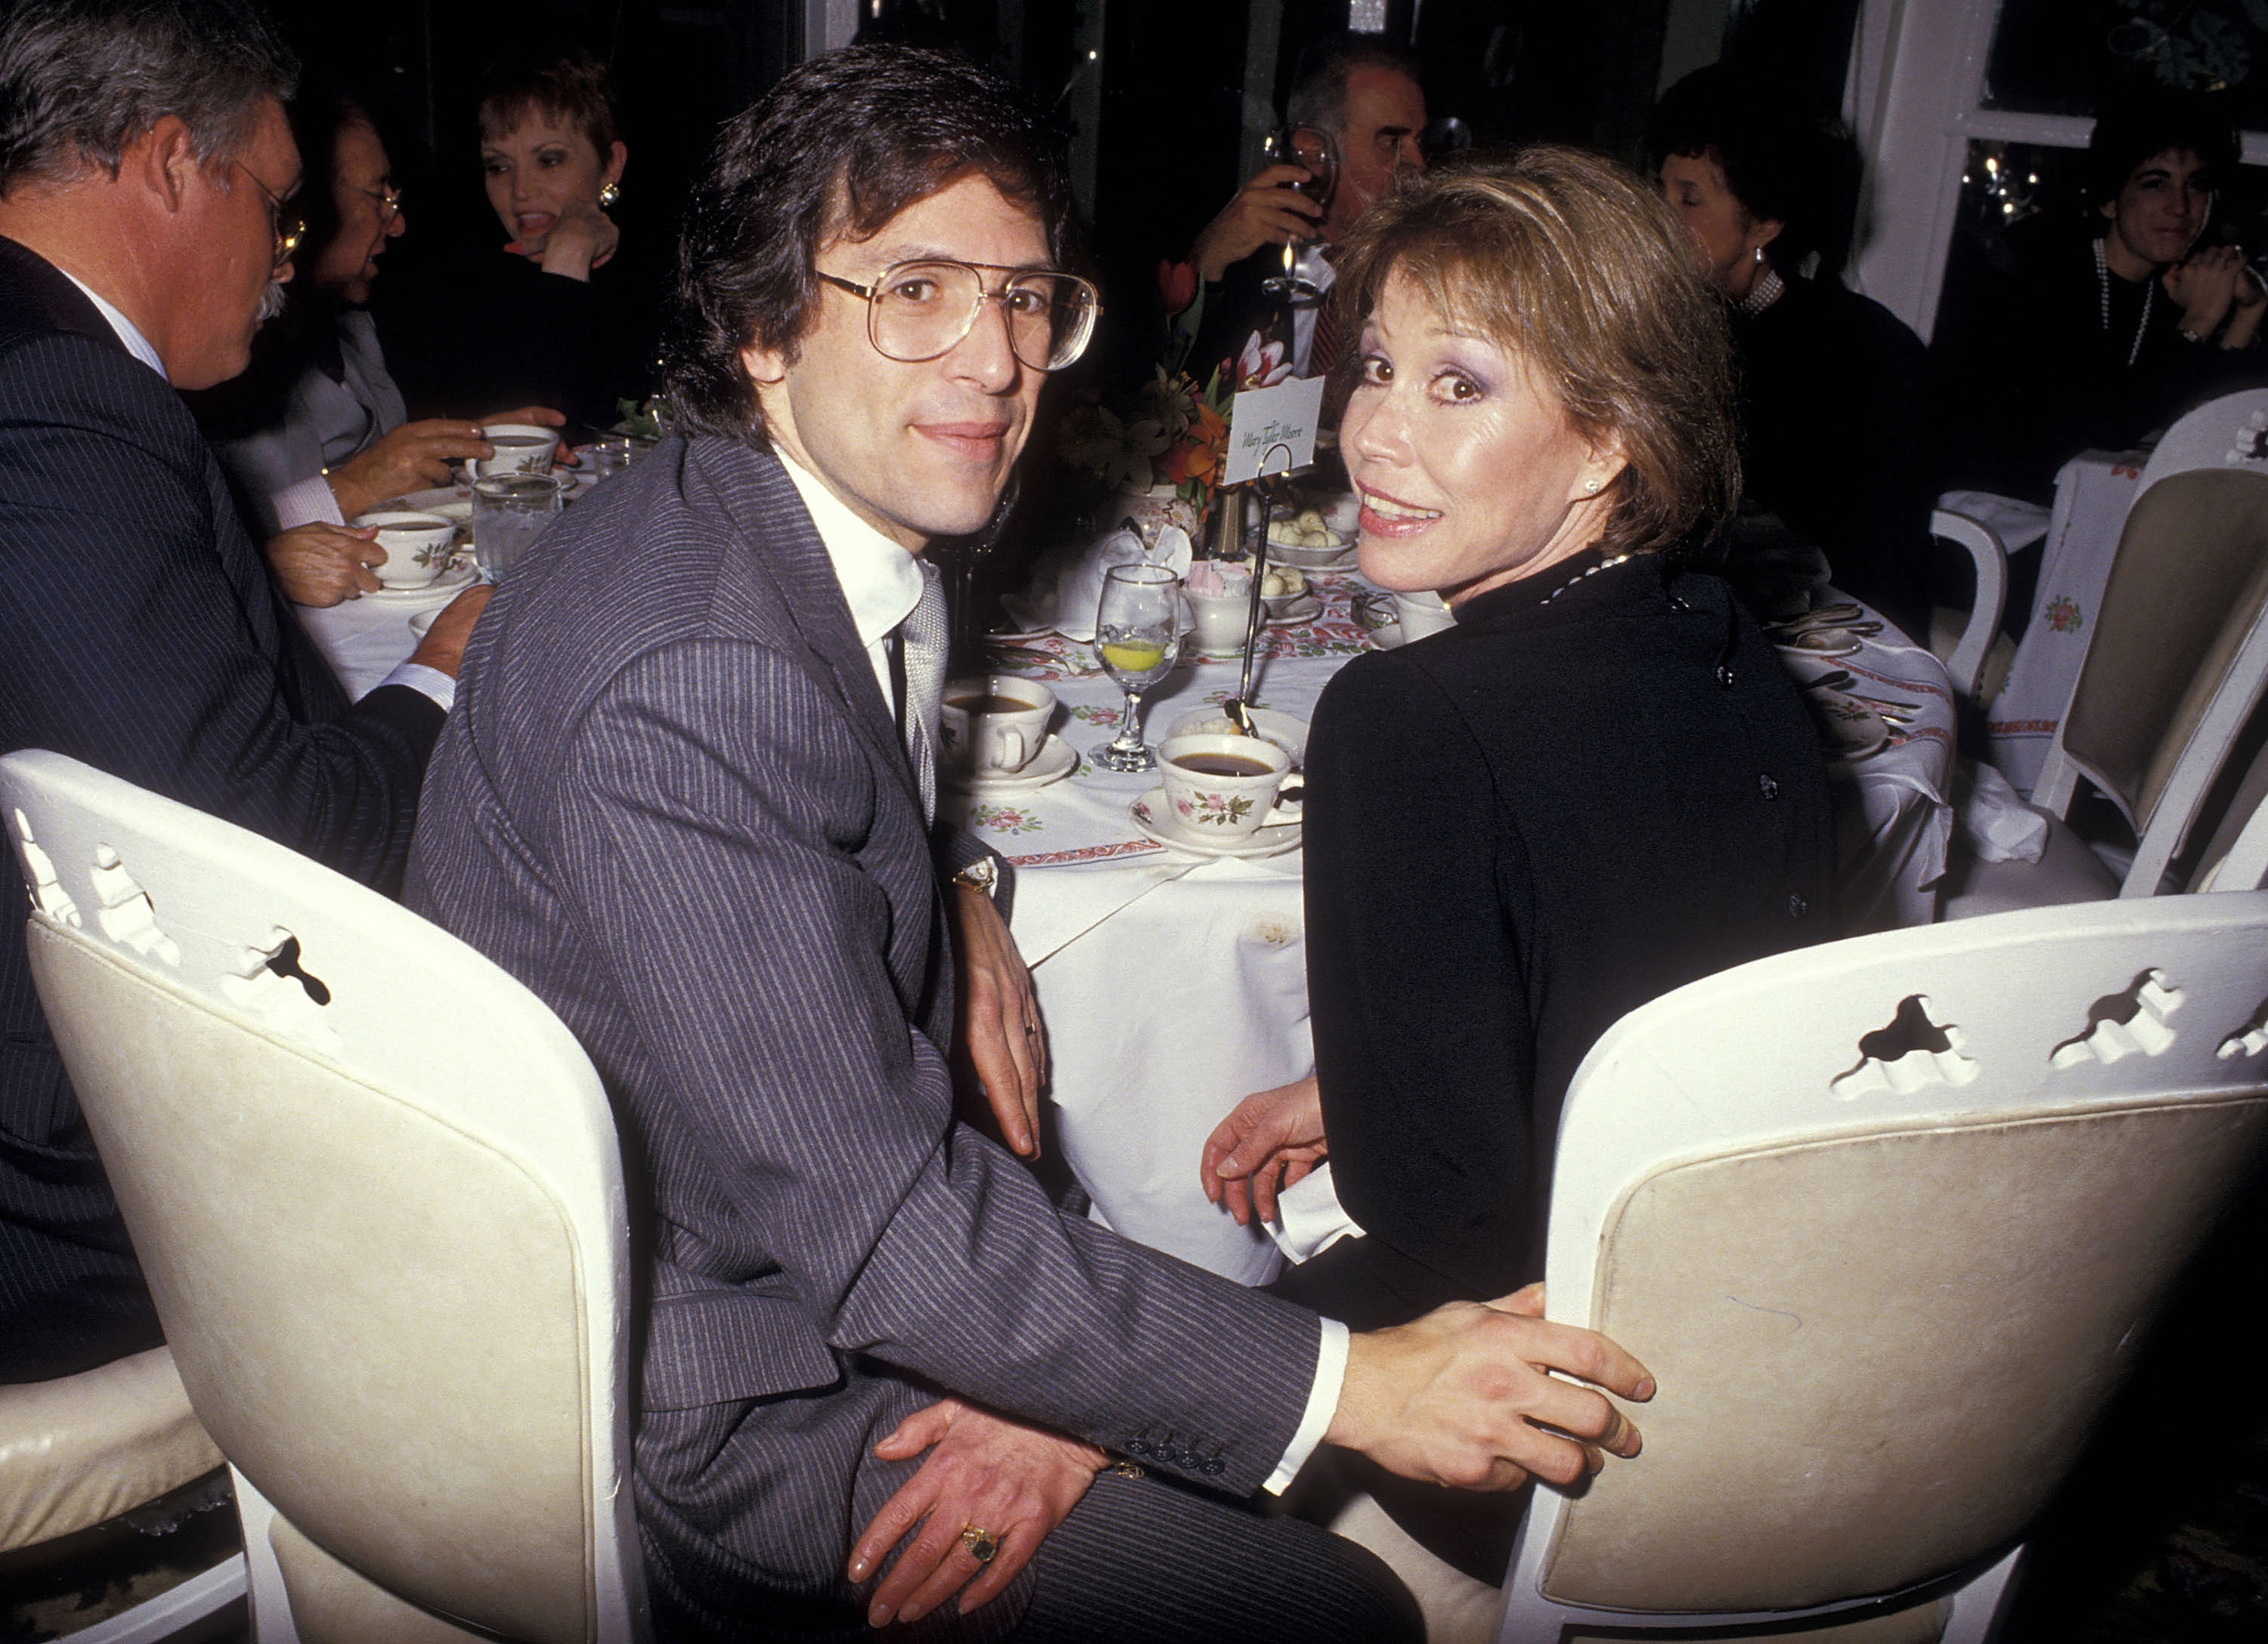 Dr. Robert Levine and his wife Mary Tyler Moore attend the "Sweet Sue" Opening Night Party at the Tavern on the Green on January 8, 1987 in New York City | Source: Getty Images